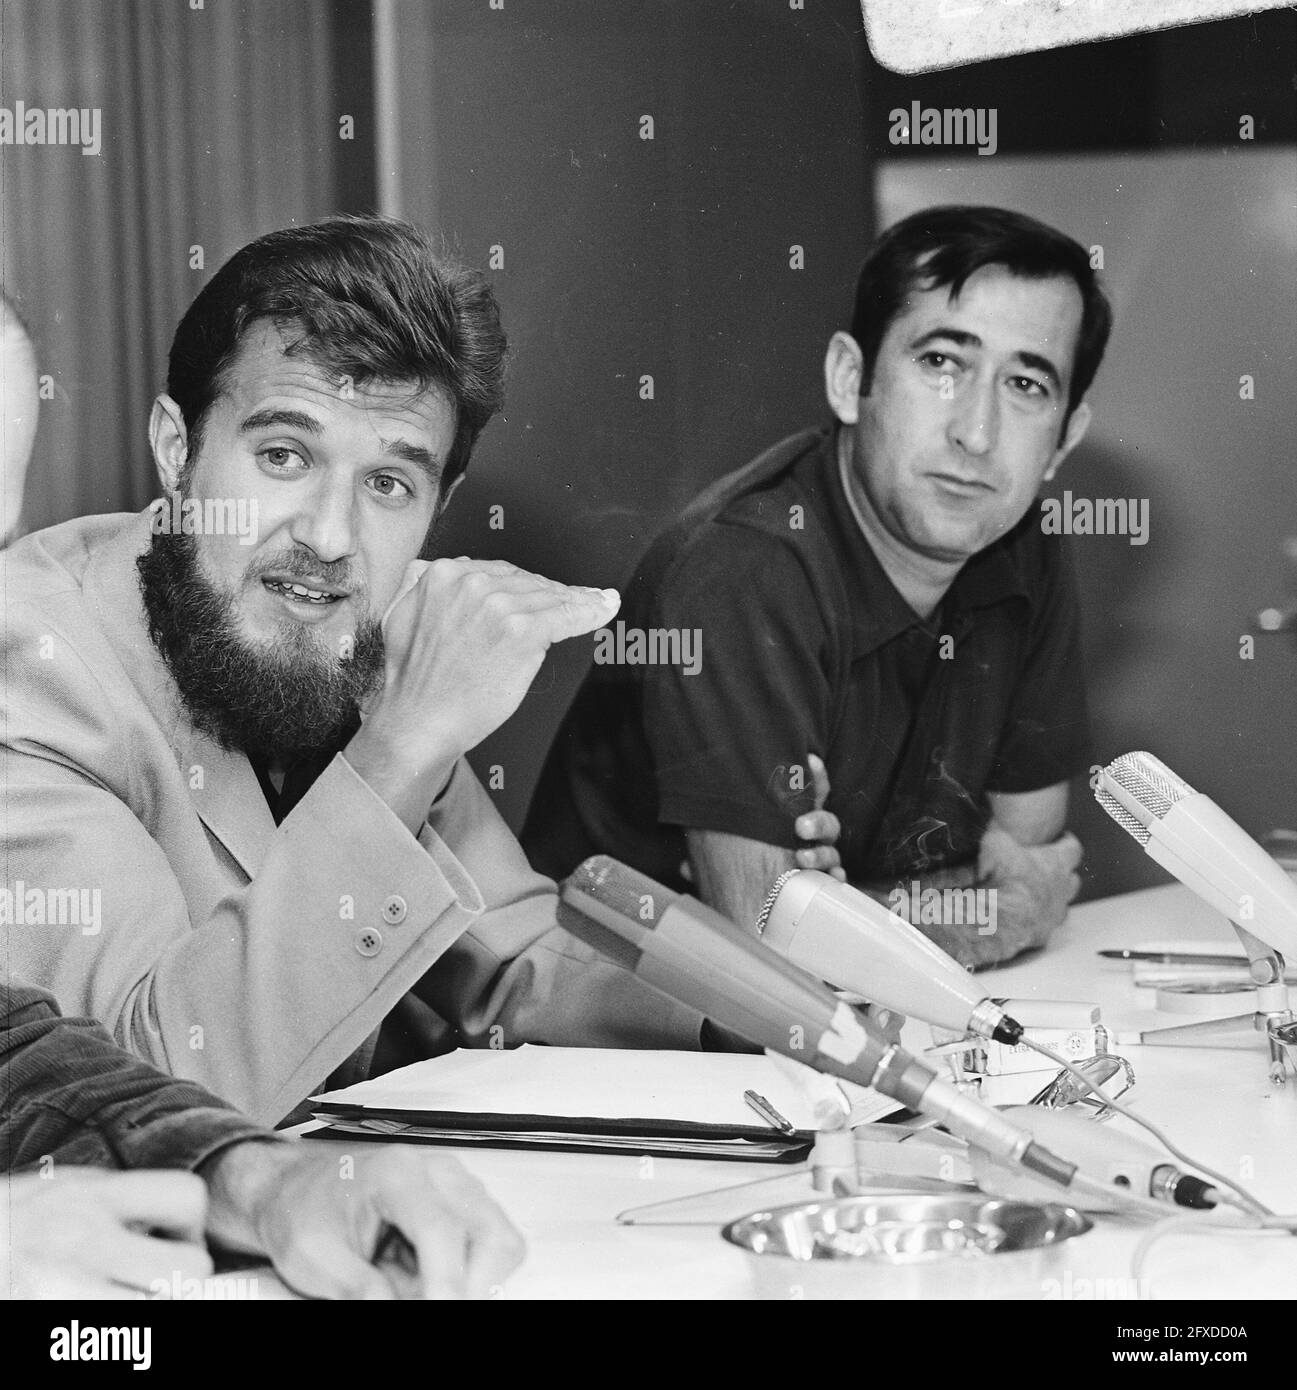 Spanish Fathers, who worked in Mozambique, at Schiphol Airport, left Julio Moure and Vincerte Berenguer, July 31, 1973, priests, The Netherlands, 20th century press agency photo, news to remember, documentary, historic photography 1945-1990, visual stories, human history of the Twentieth Century, capturing moments in time Stock Photo